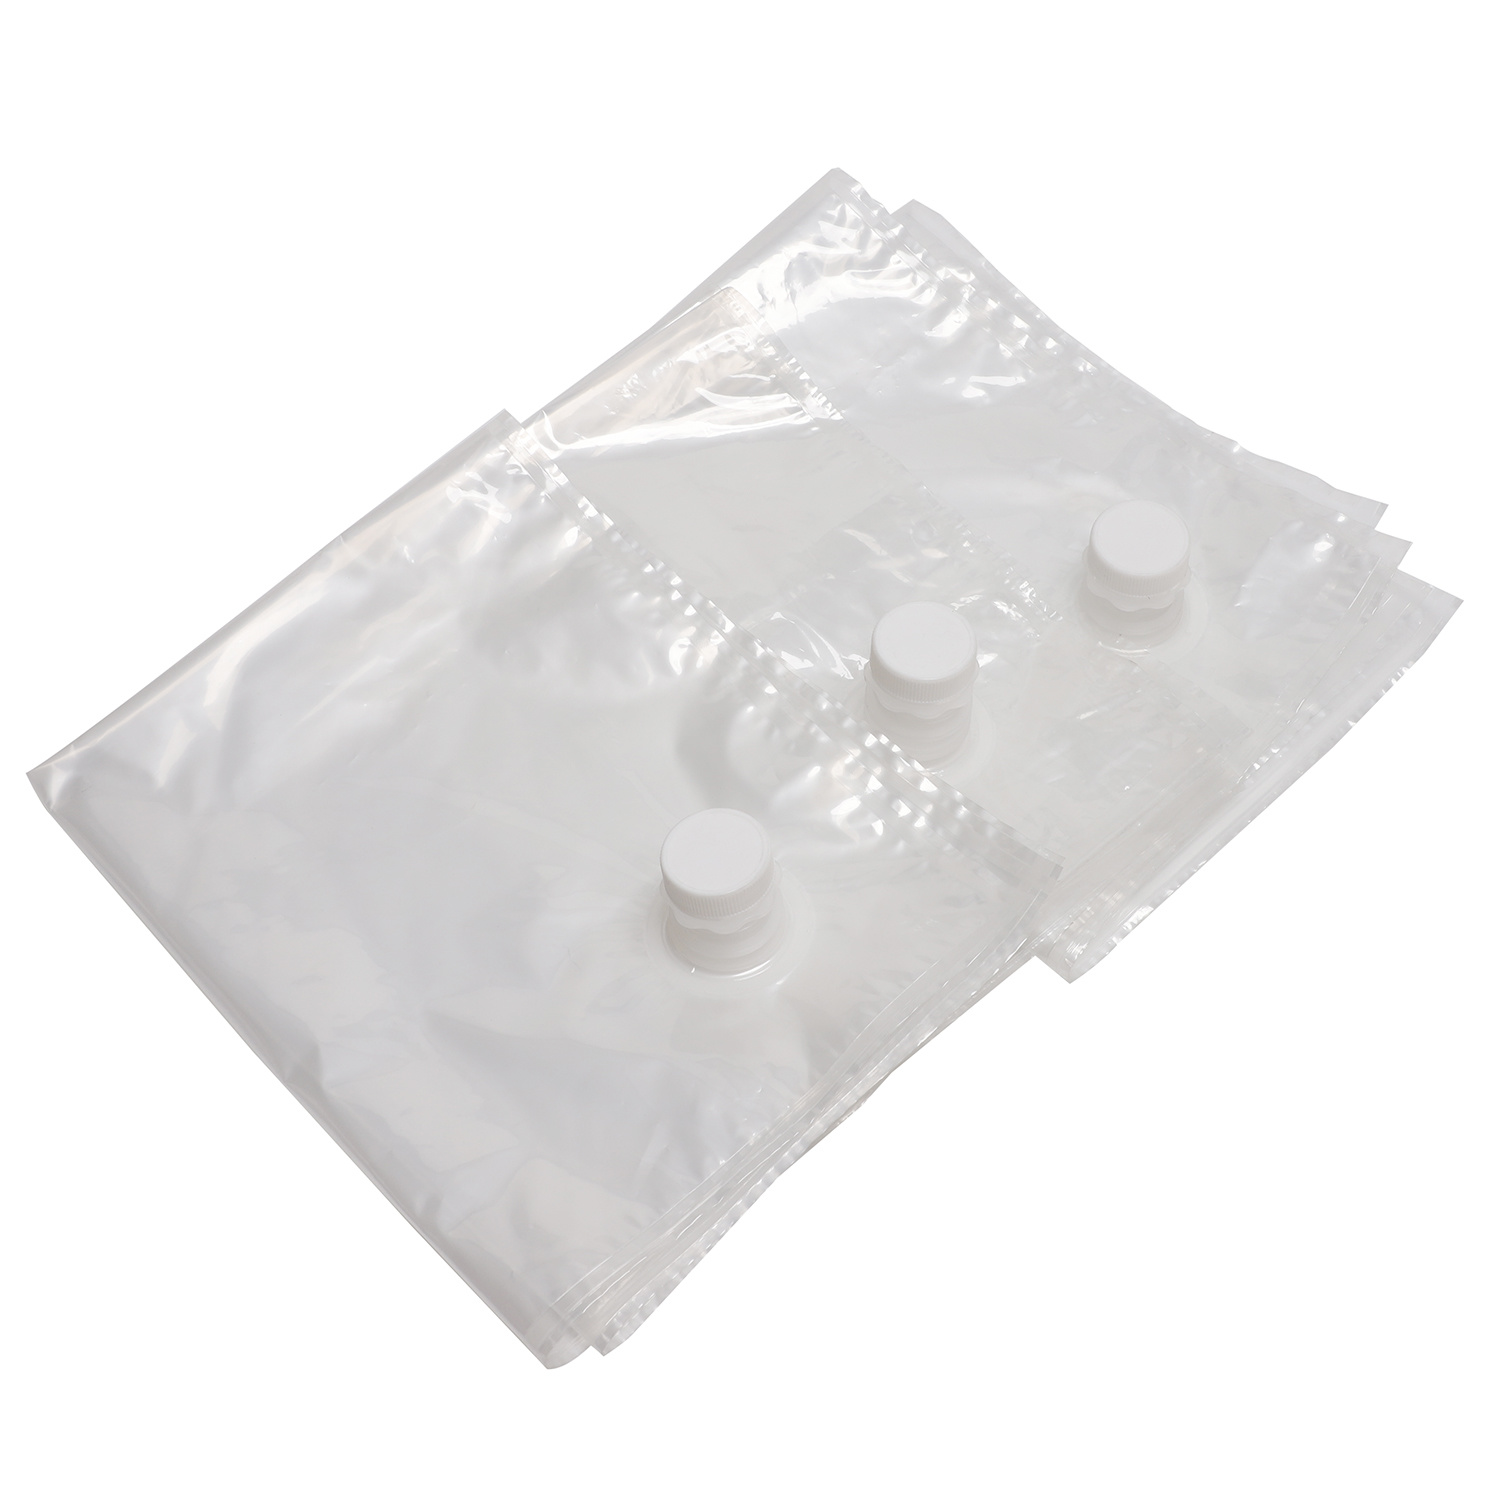 Unipack Aseptic Bib Bag Liquid Bag in Box Packagingfor Red Wine and Oil  Beverage with Holder Valve - China Aseptic Bags, Hig Quality Bags |  Made-in-China.com